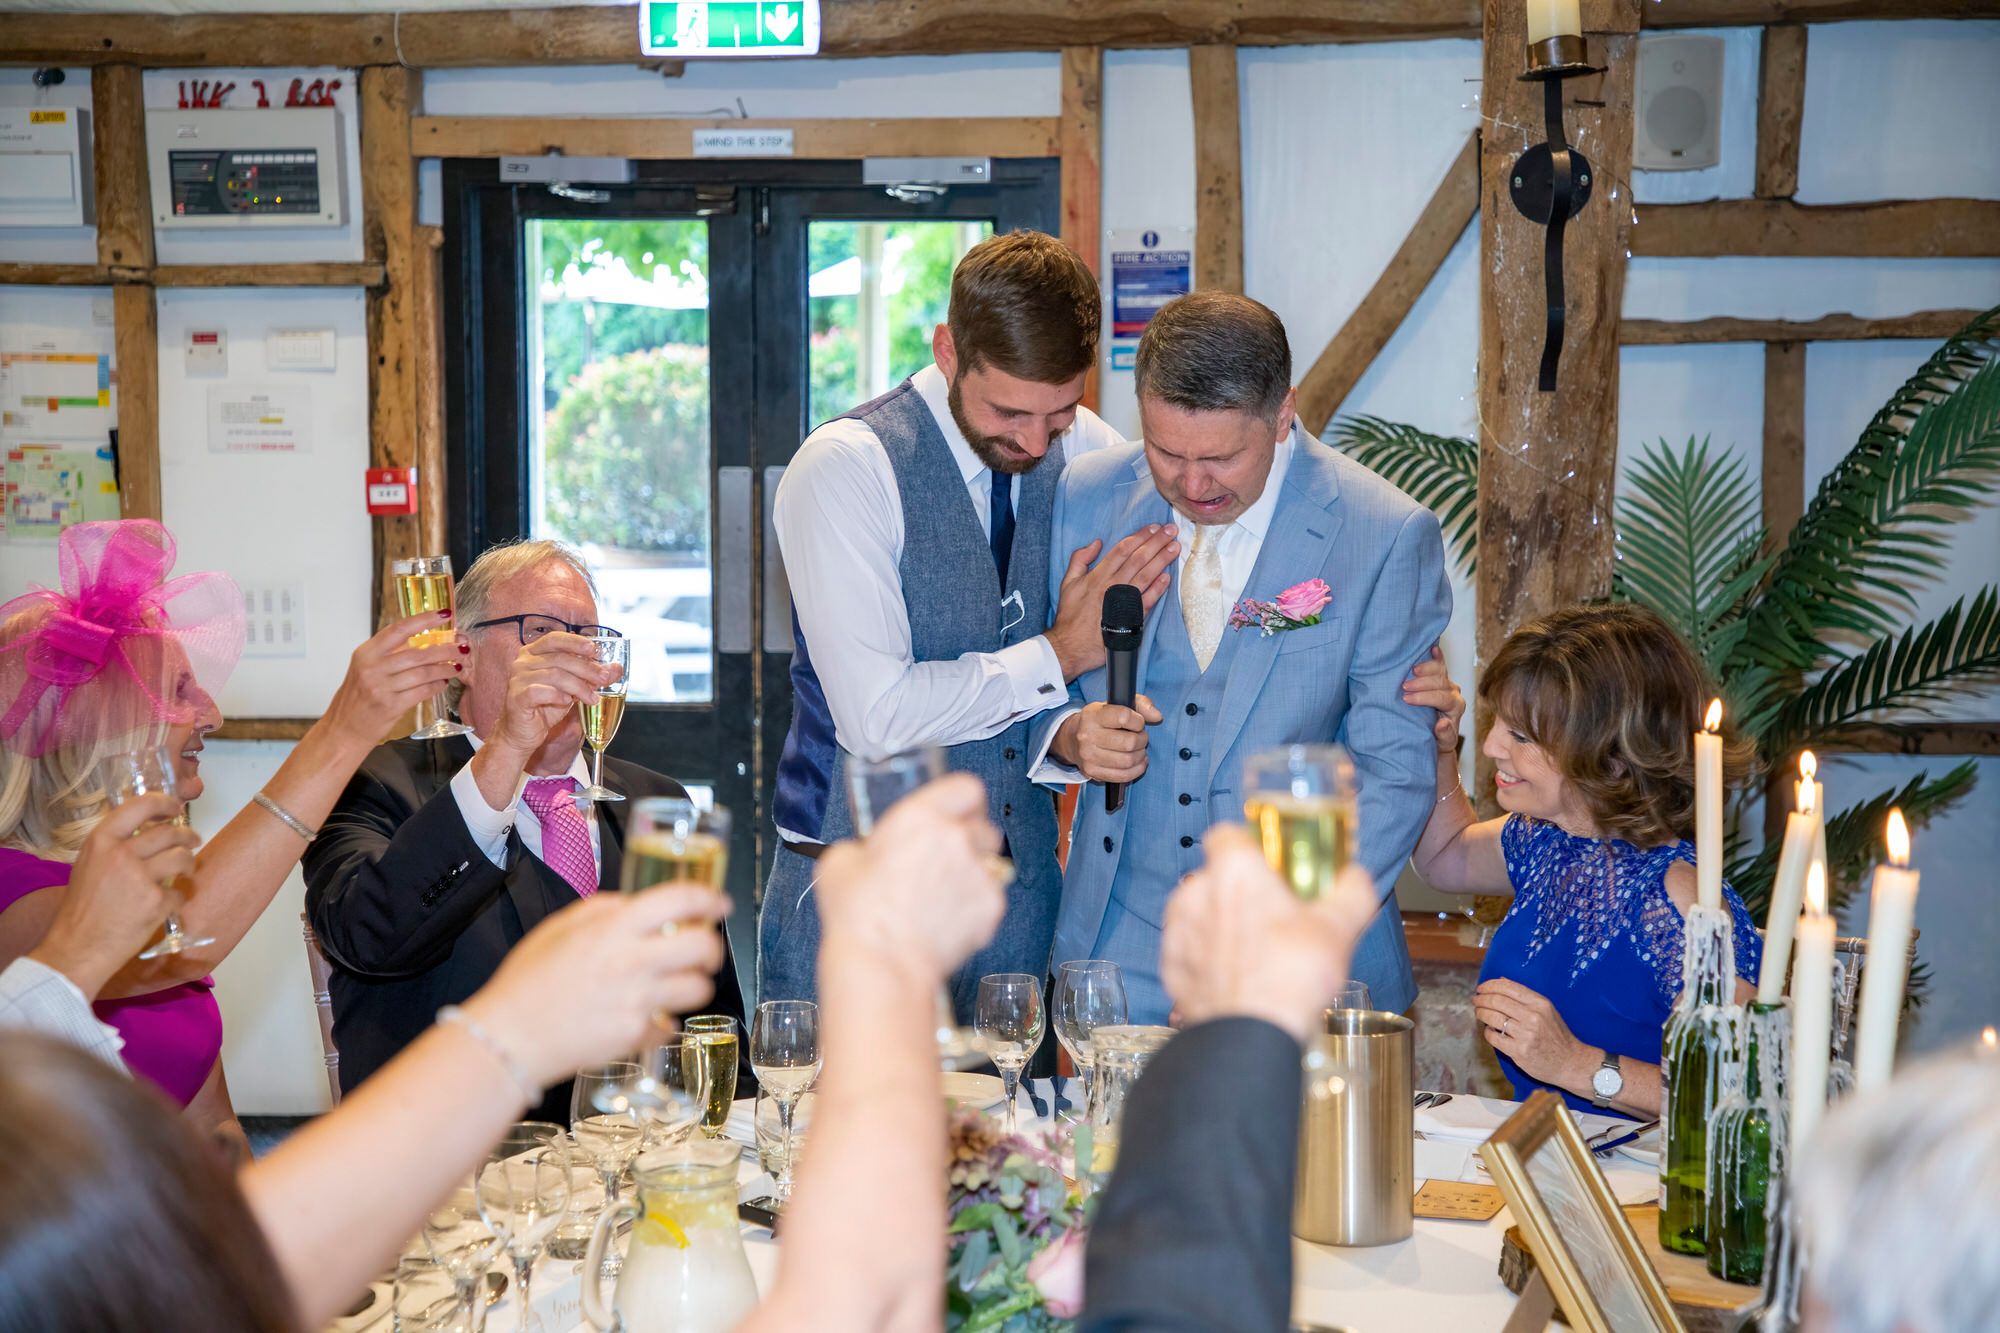 Emotional speeches - Joanna's brother hugging their Dad during his toast. Other guests raising their glasses. Photo thanks to Nigel Charman Photography. 